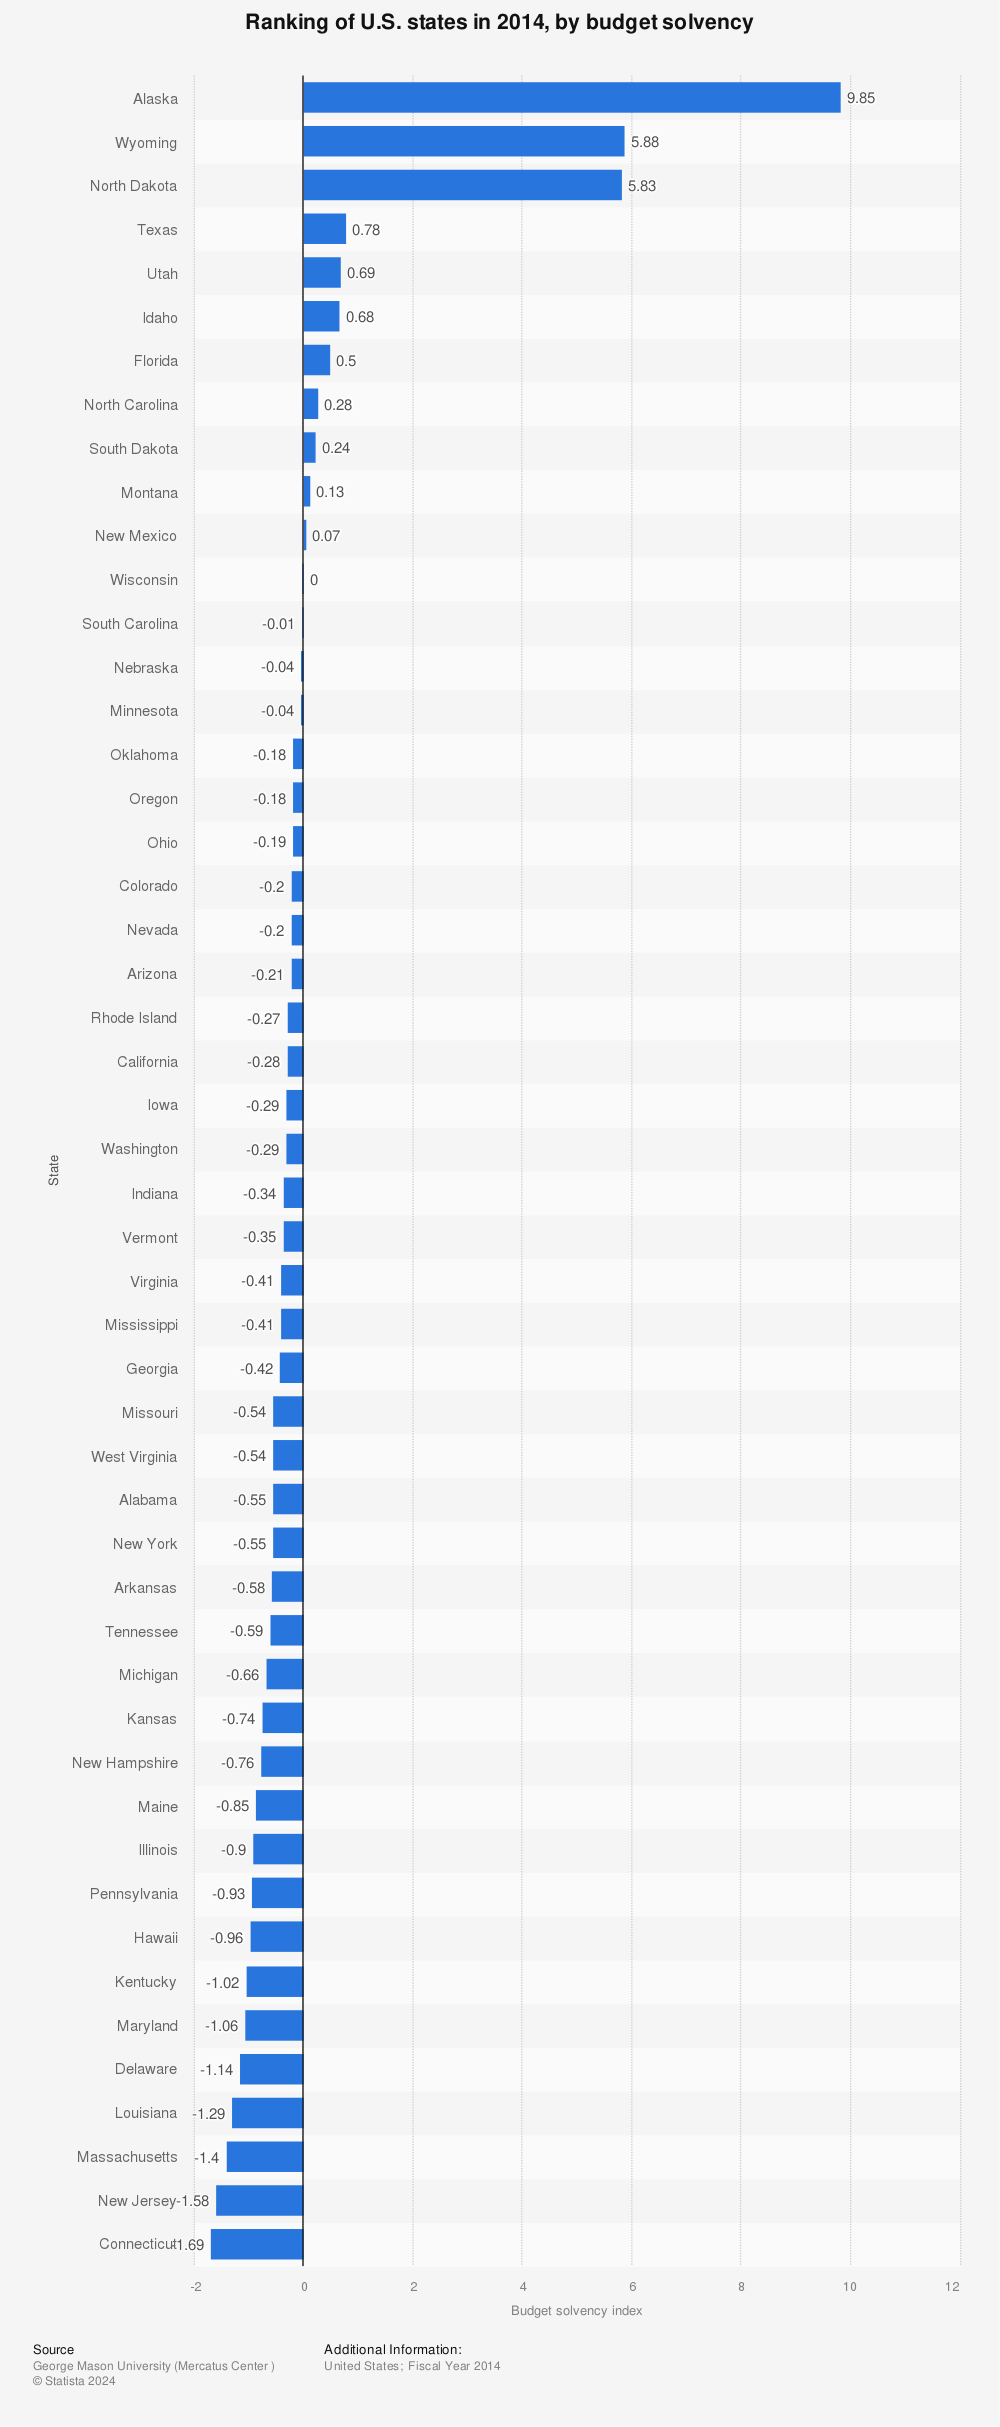 Statistic: Ranking of U.S. states in 2014, by budget solvency | Statista